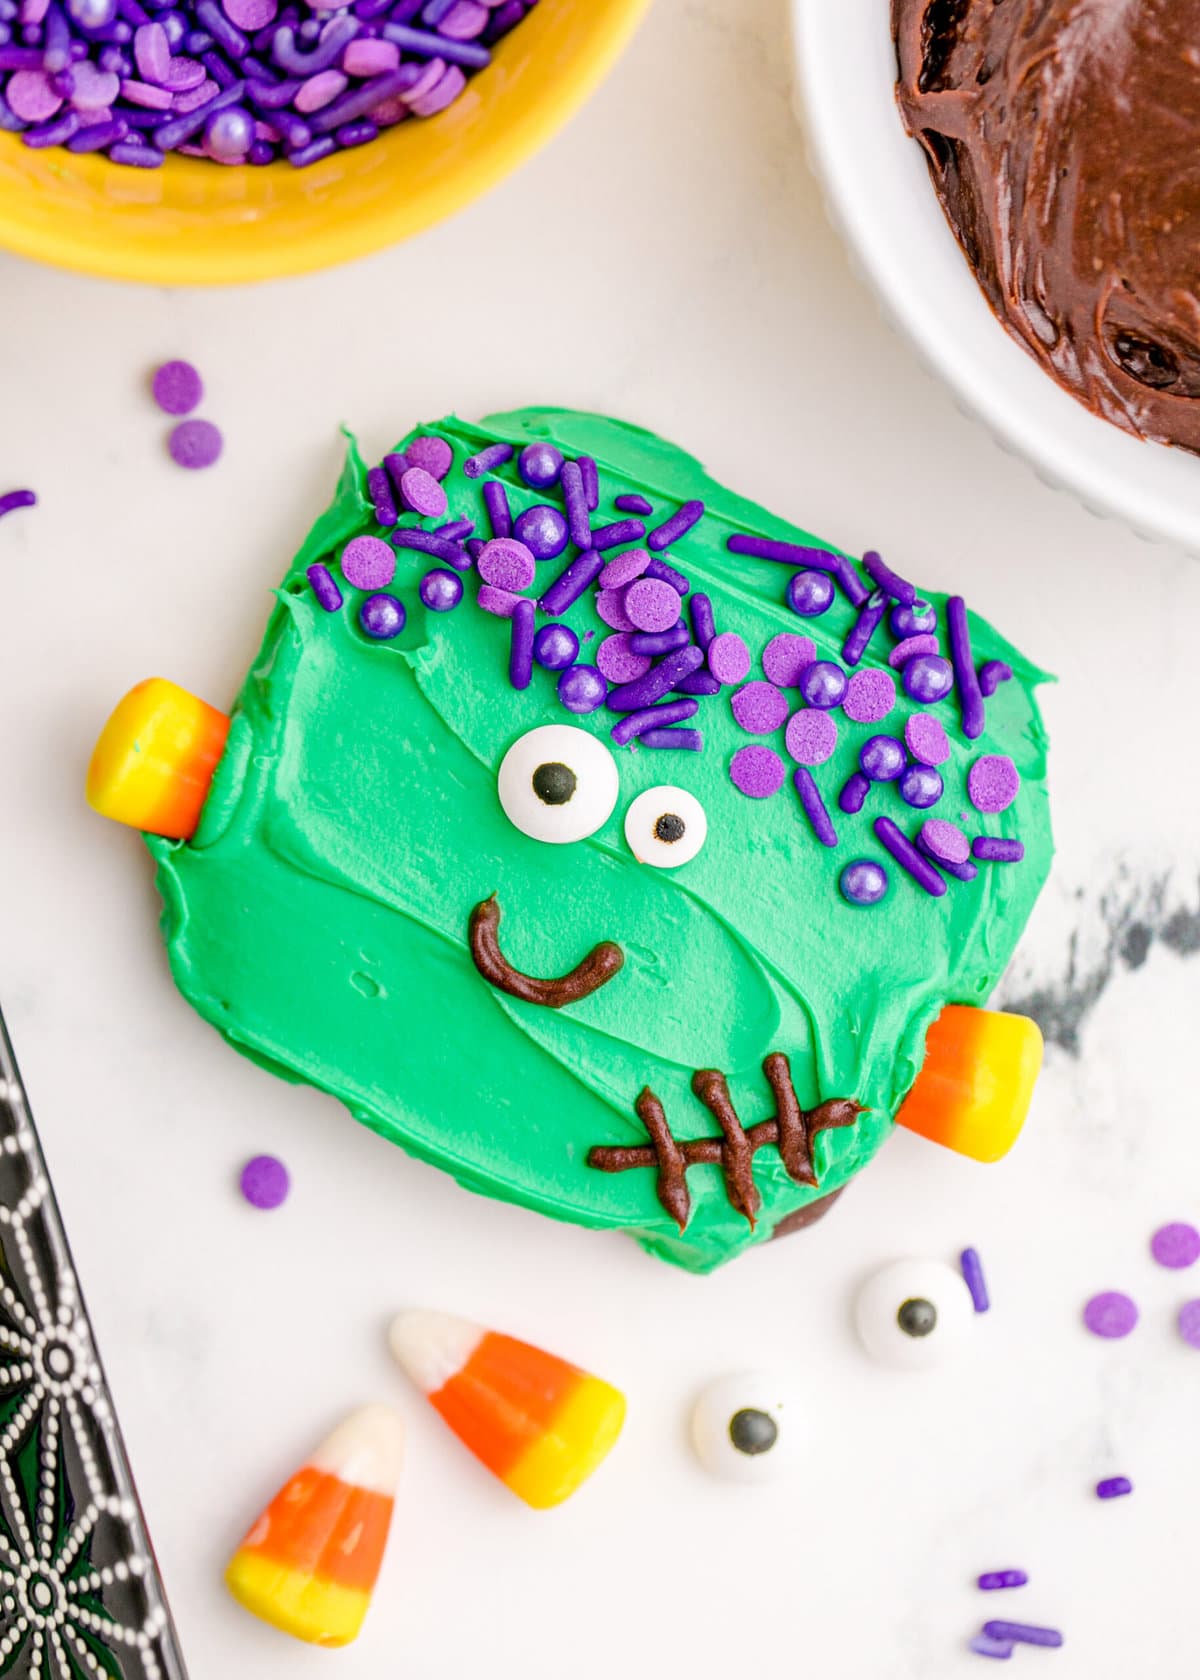 picture of chocolate dipped cookies, covered in green icing with purple sprinkles for hair, candy corn neck bolts, candy eyes, and an icing smile to look like frankenstein